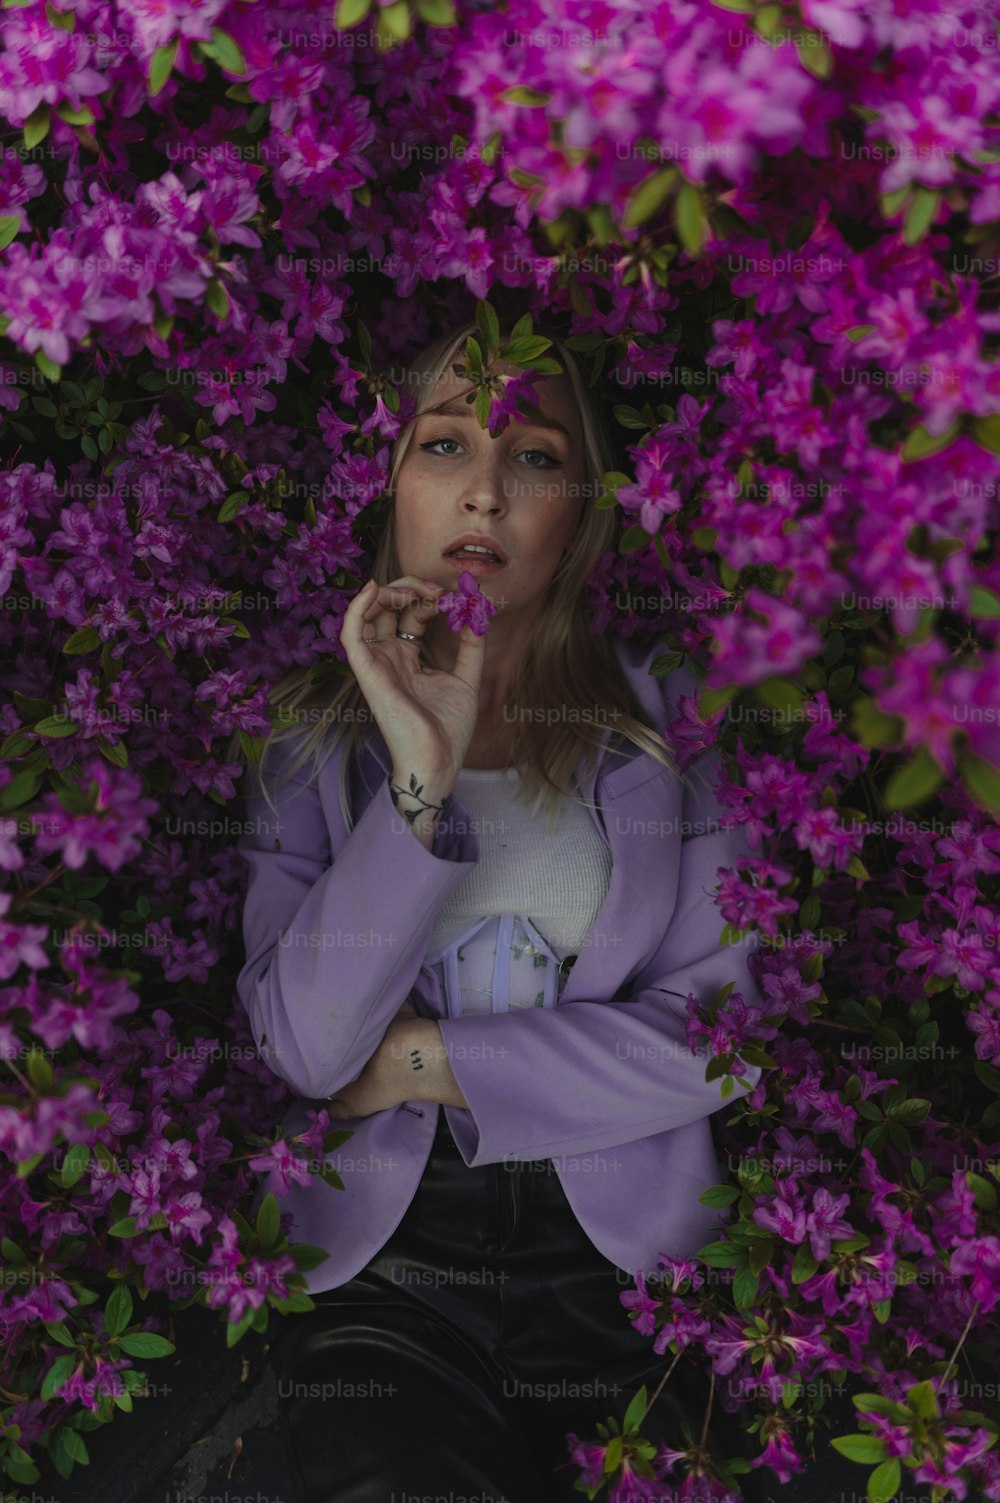 a woman in a purple jacket is surrounded by purple flowers